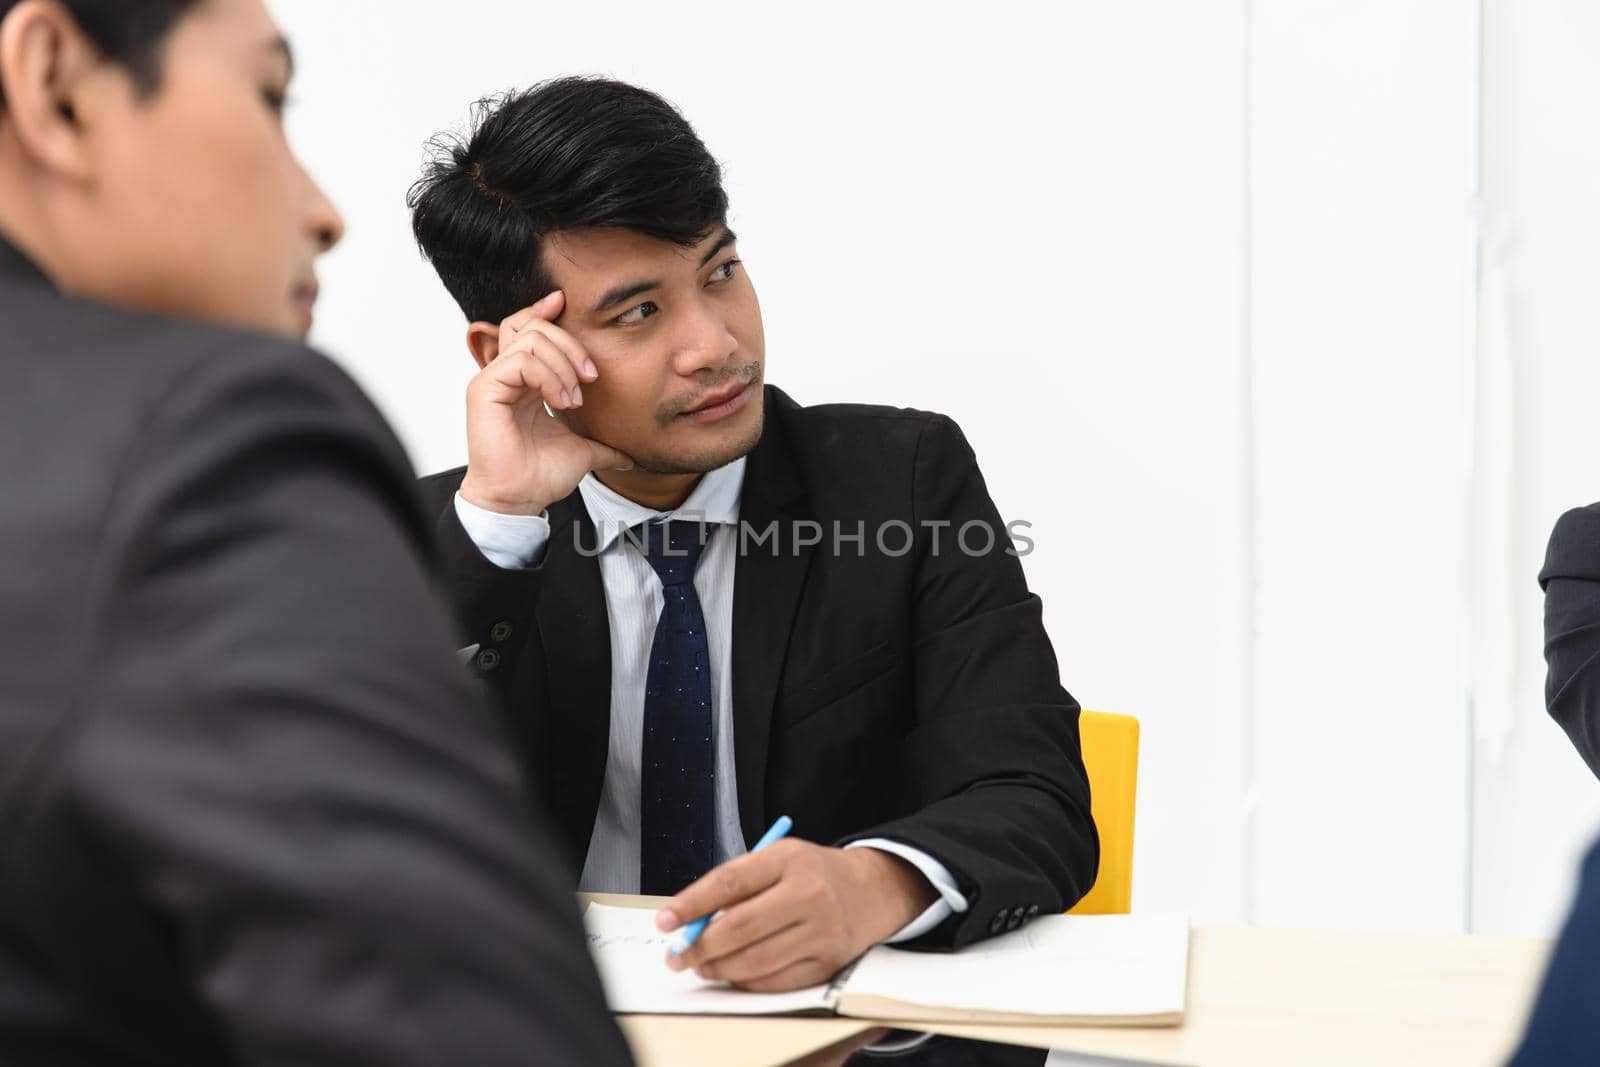 Businessman attend a meeting listening with intend bore and serious mood.Asian Business male boring at work in office seminar.